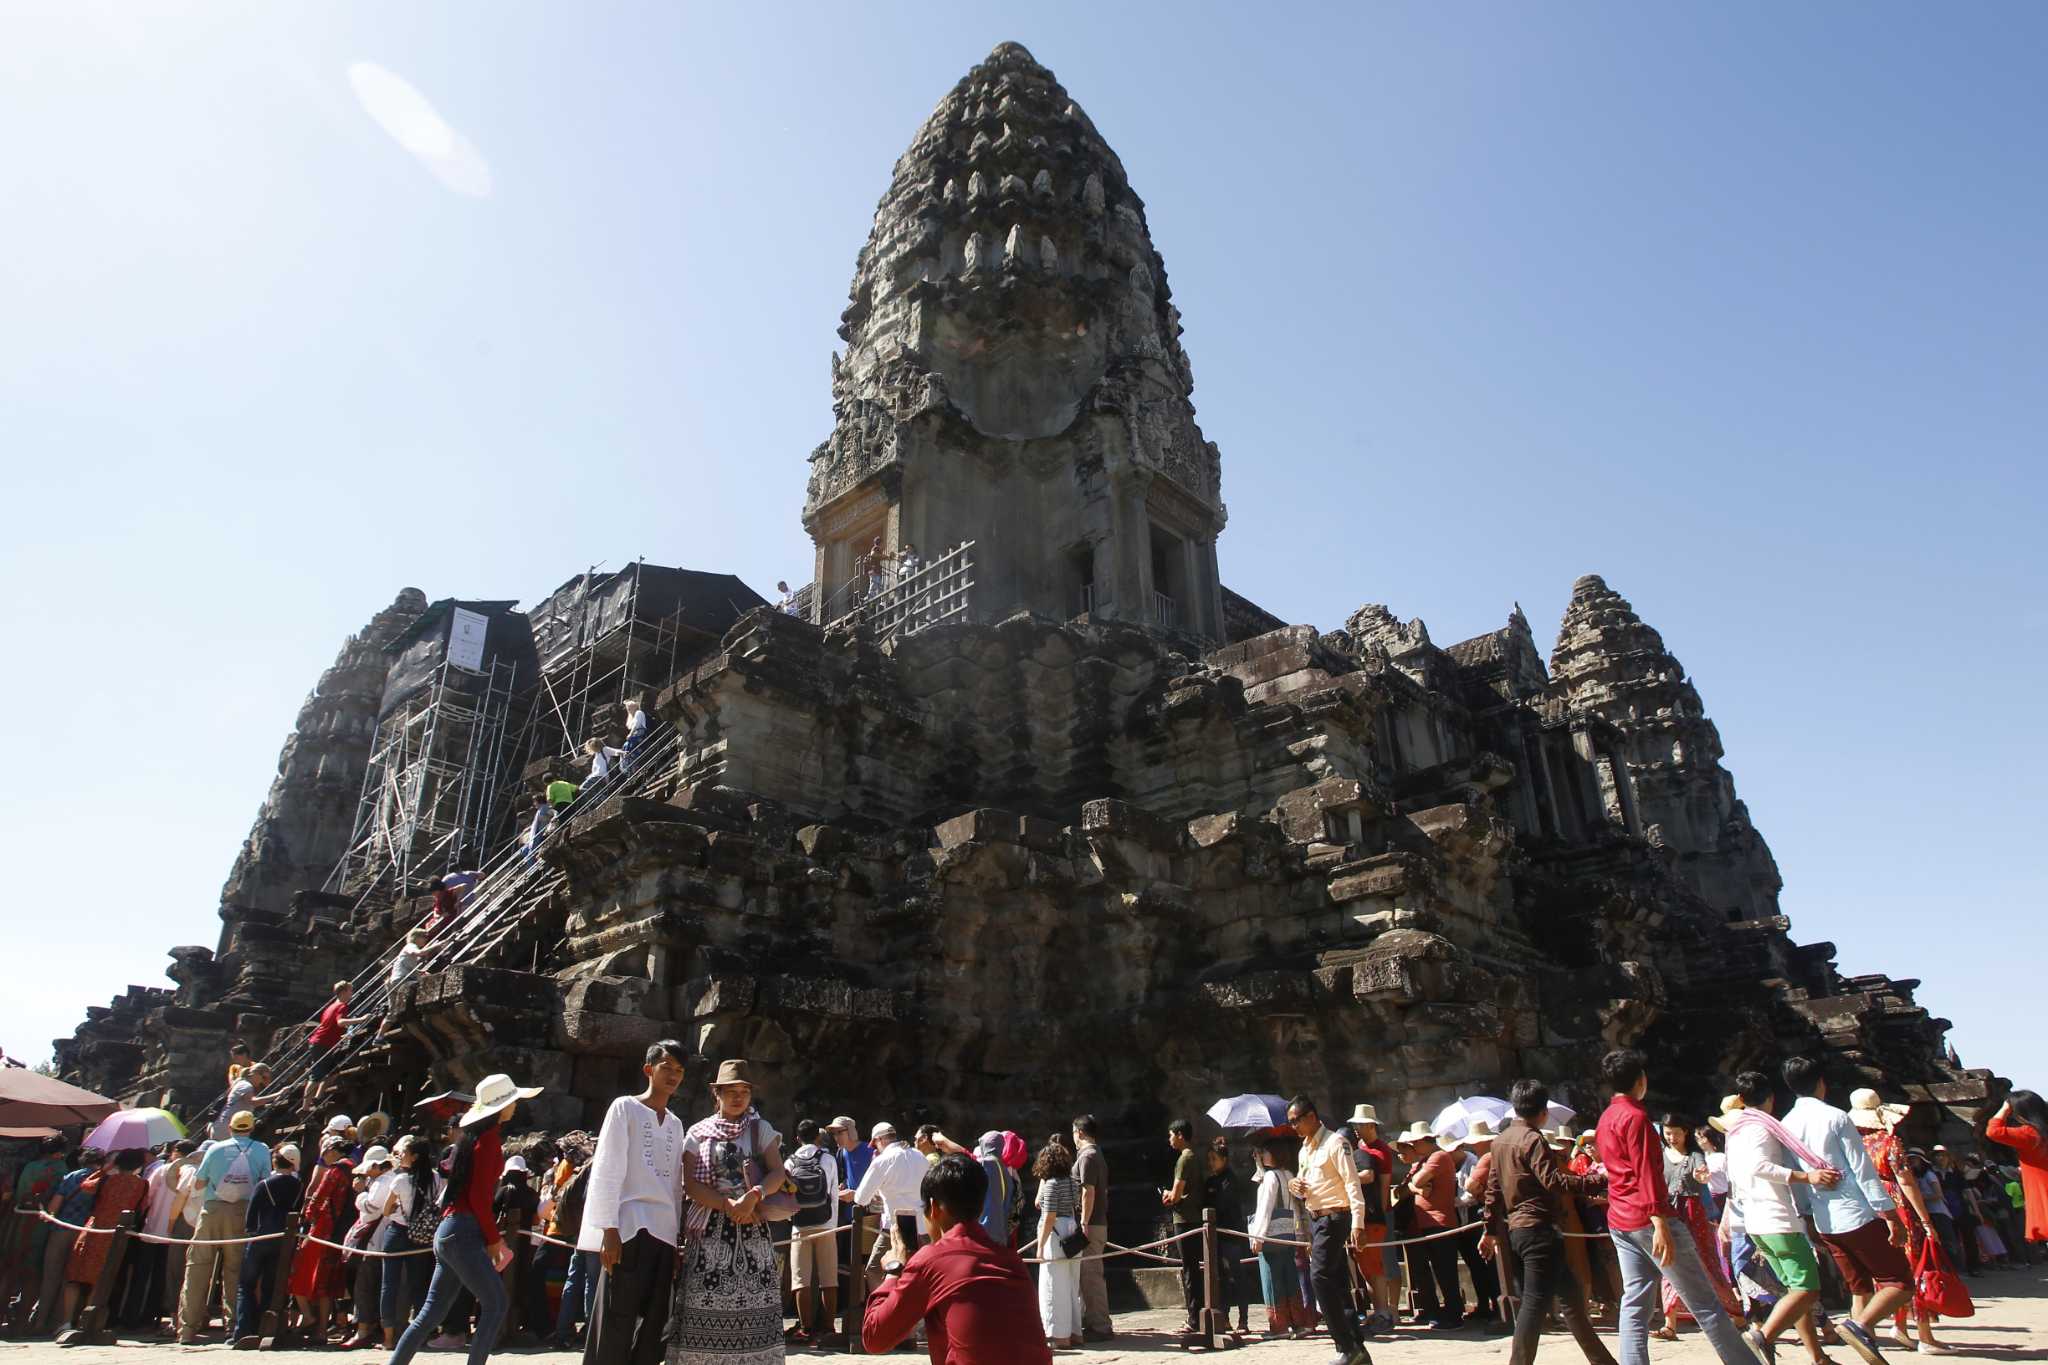 Fierce storm topples tree at Cambodian Angkor temple complex, killing 1 and damaging statues